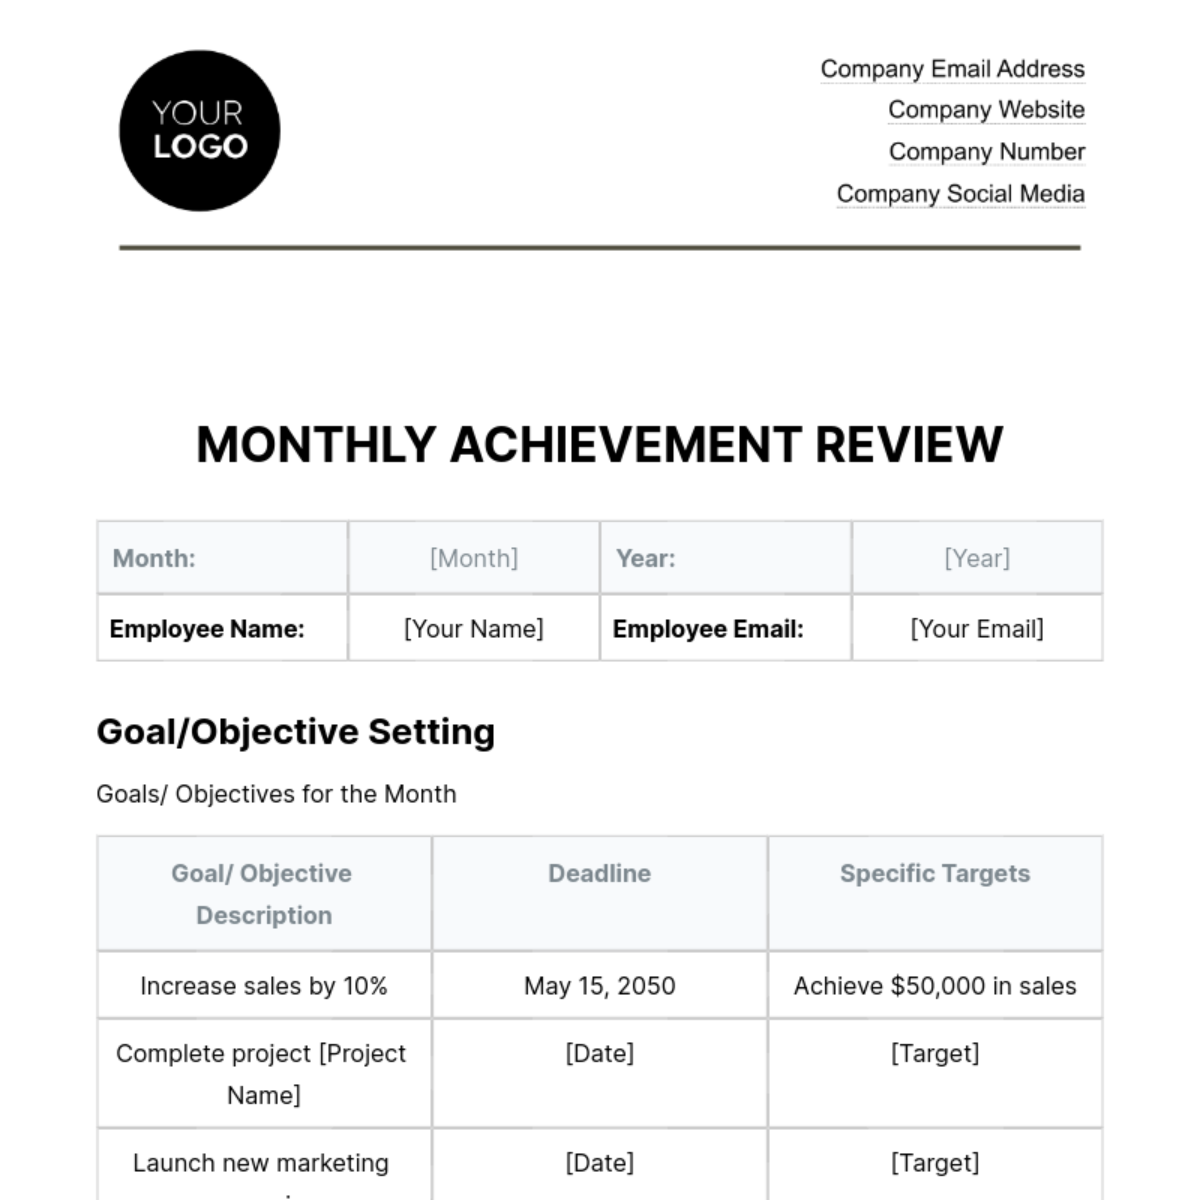 Free Monthly Achievement Review HR Template